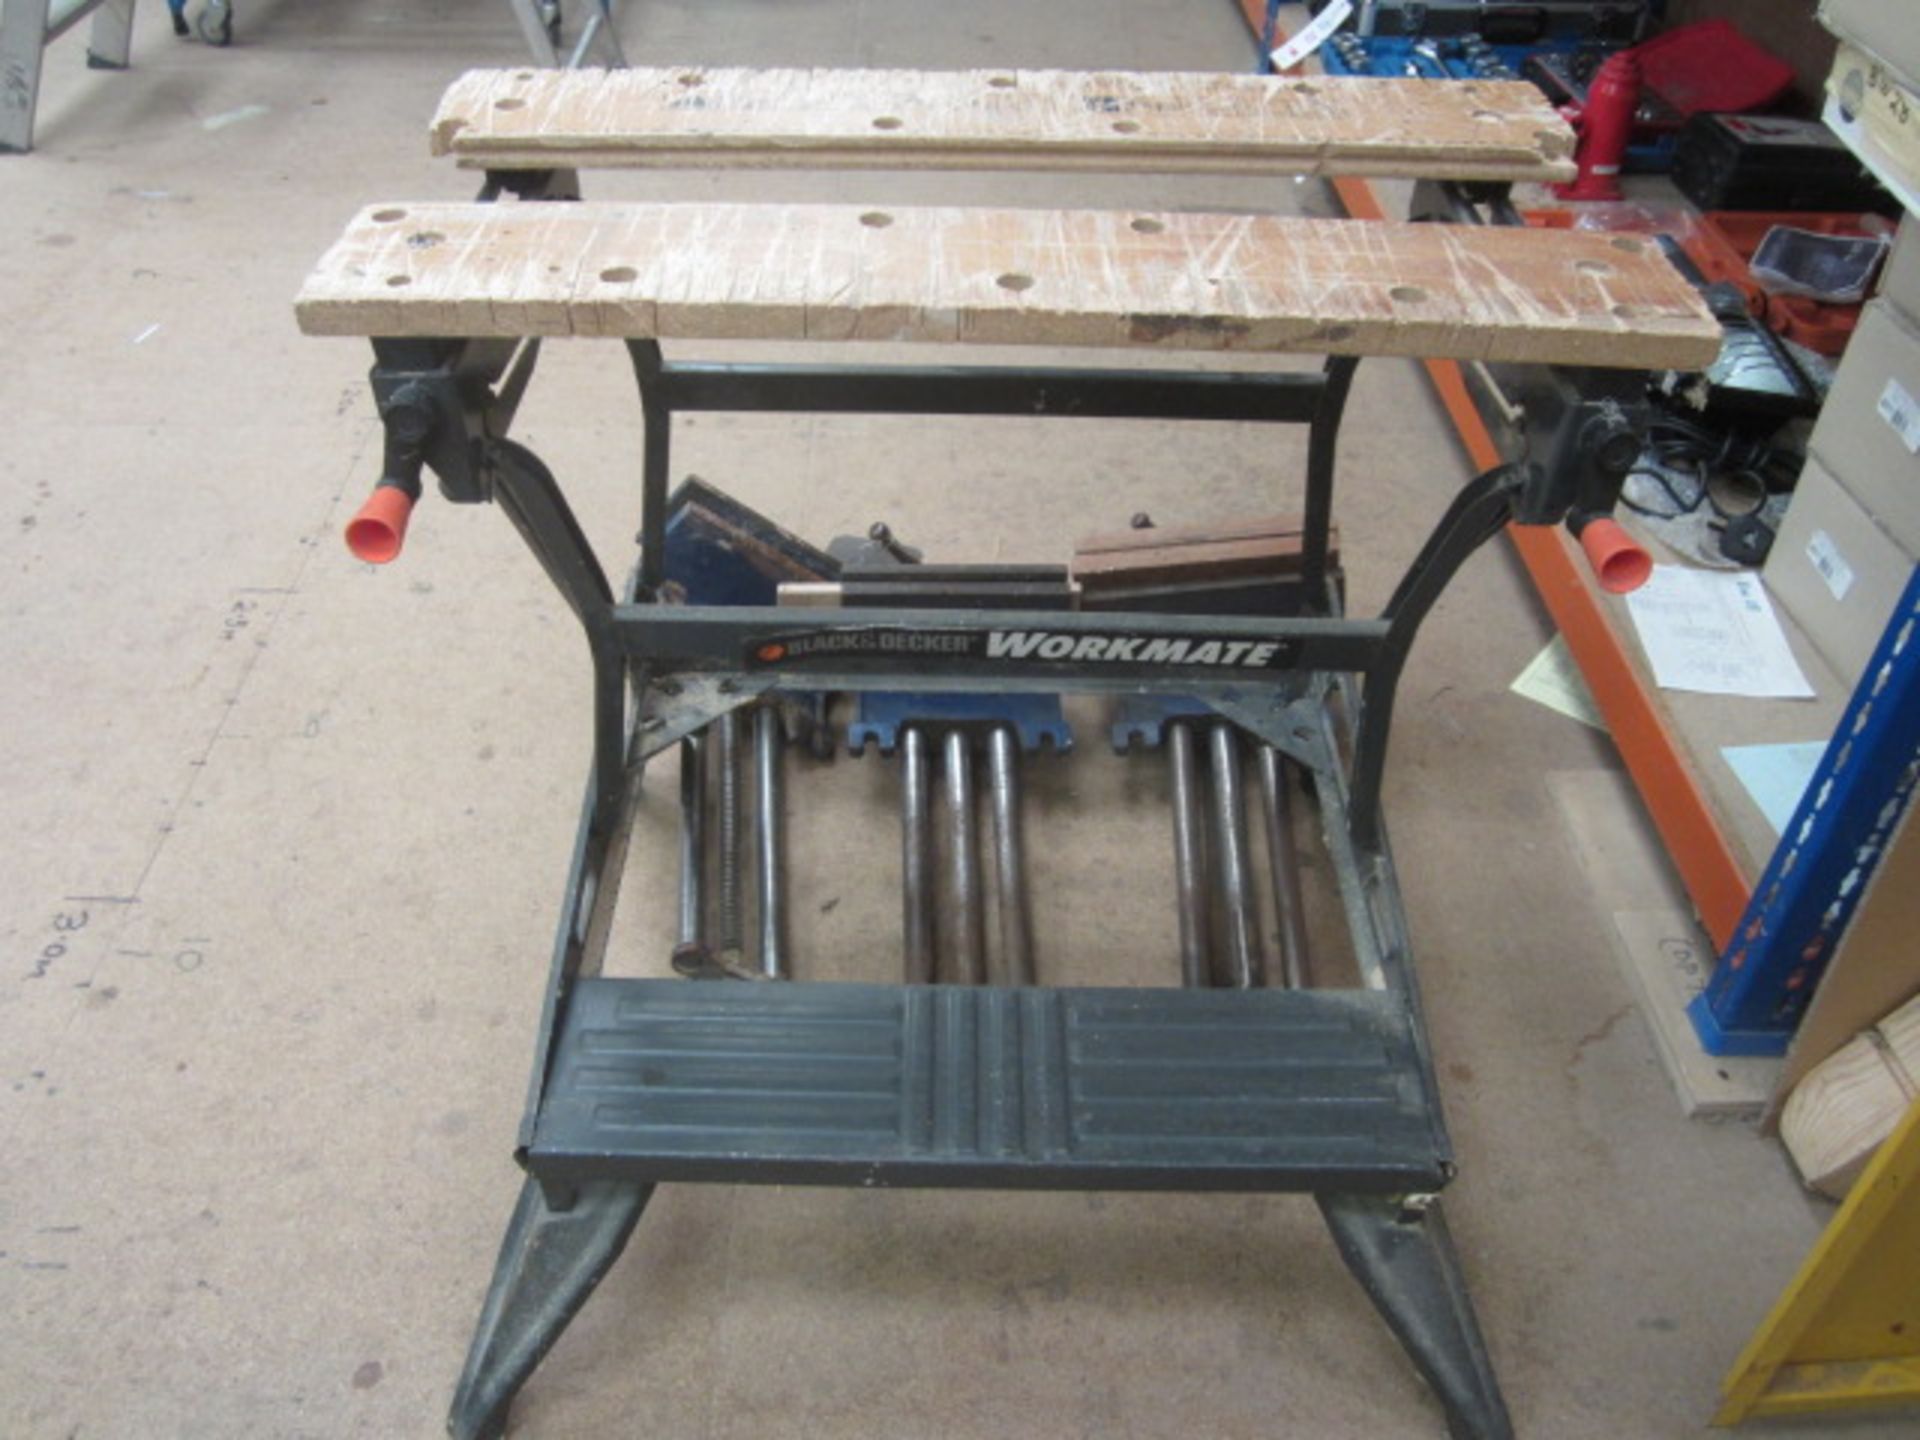 3 x carpenters bench vices, workmate - Image 3 of 3